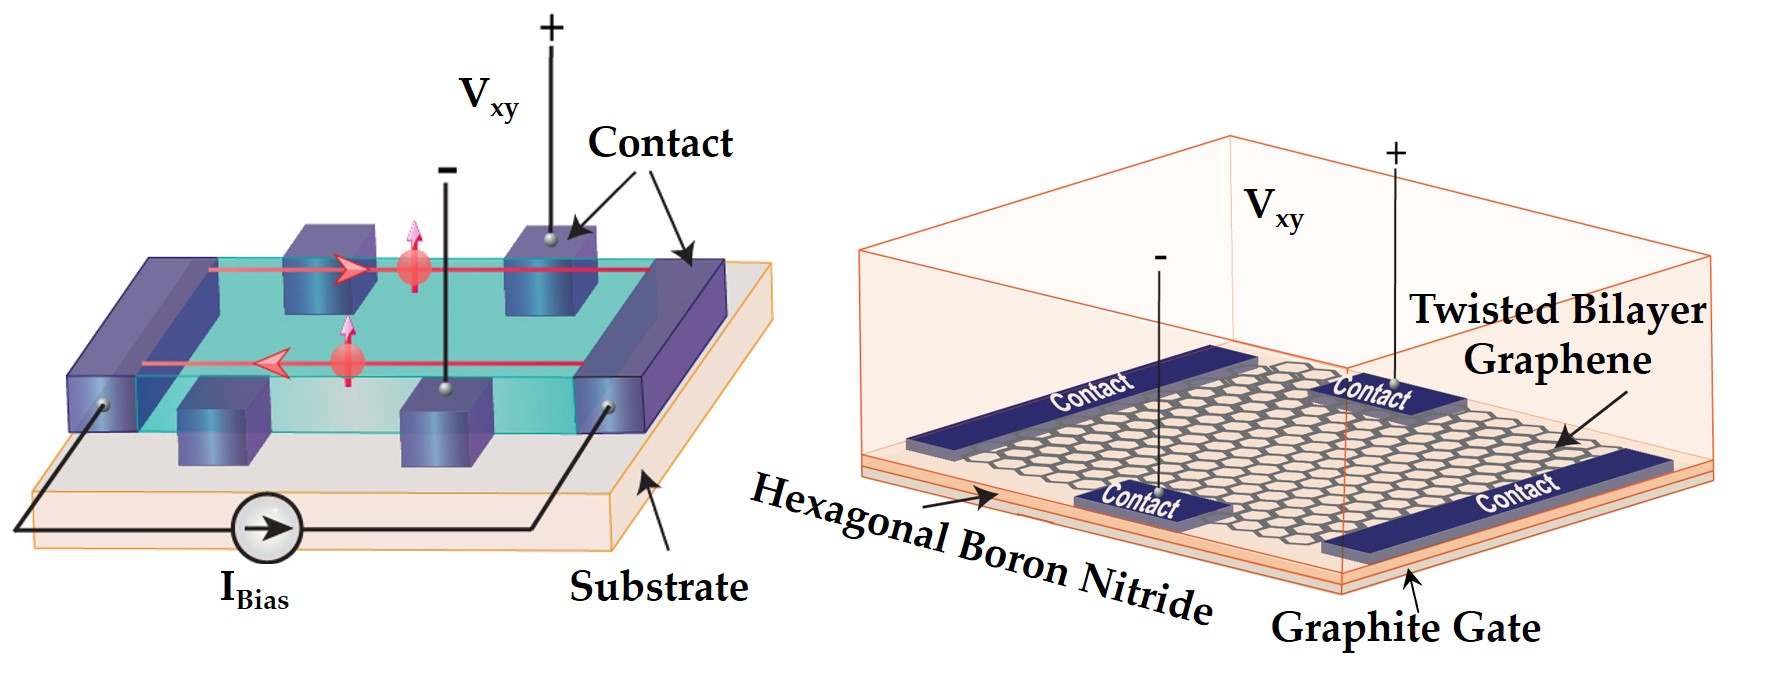 An illustration of the quantum anomalous Hall effect in a topological insulator, and the schematic of the twisted bilayer graphene heterostructure used in this work to design the cryogenic memory cell